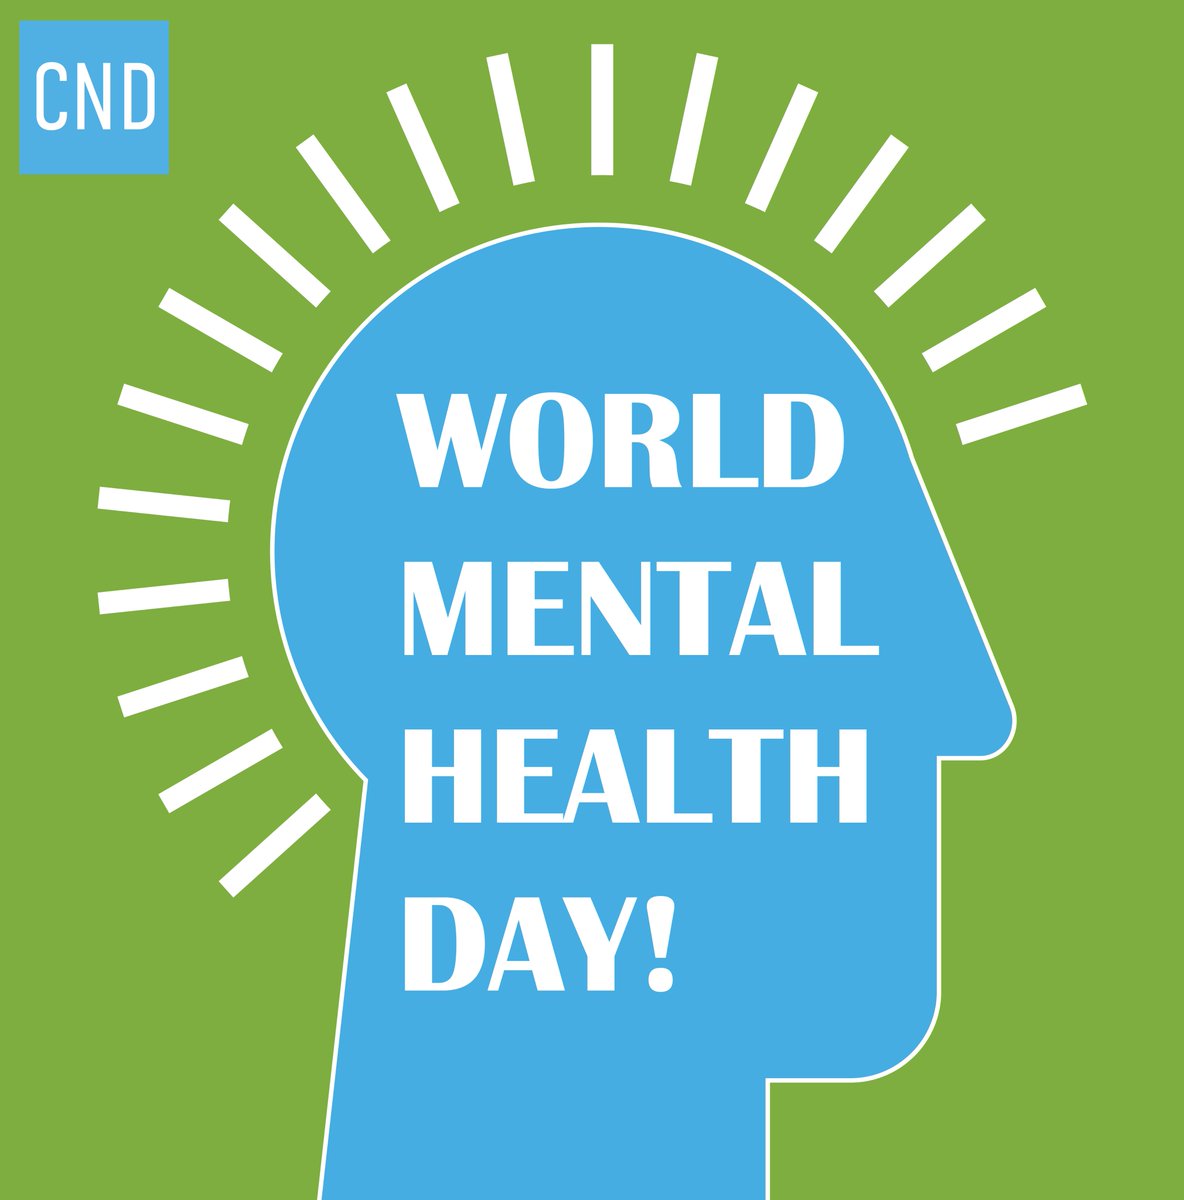 #CND65 Chair’s One-Day Special Forum coincides with the #WorldMentalHealthDay 😇 Access to internationally controlled substances for medical & scientific purposes contributes to the right to the enjoyment of the highest attainable standard of physical & mental health. #WMHD